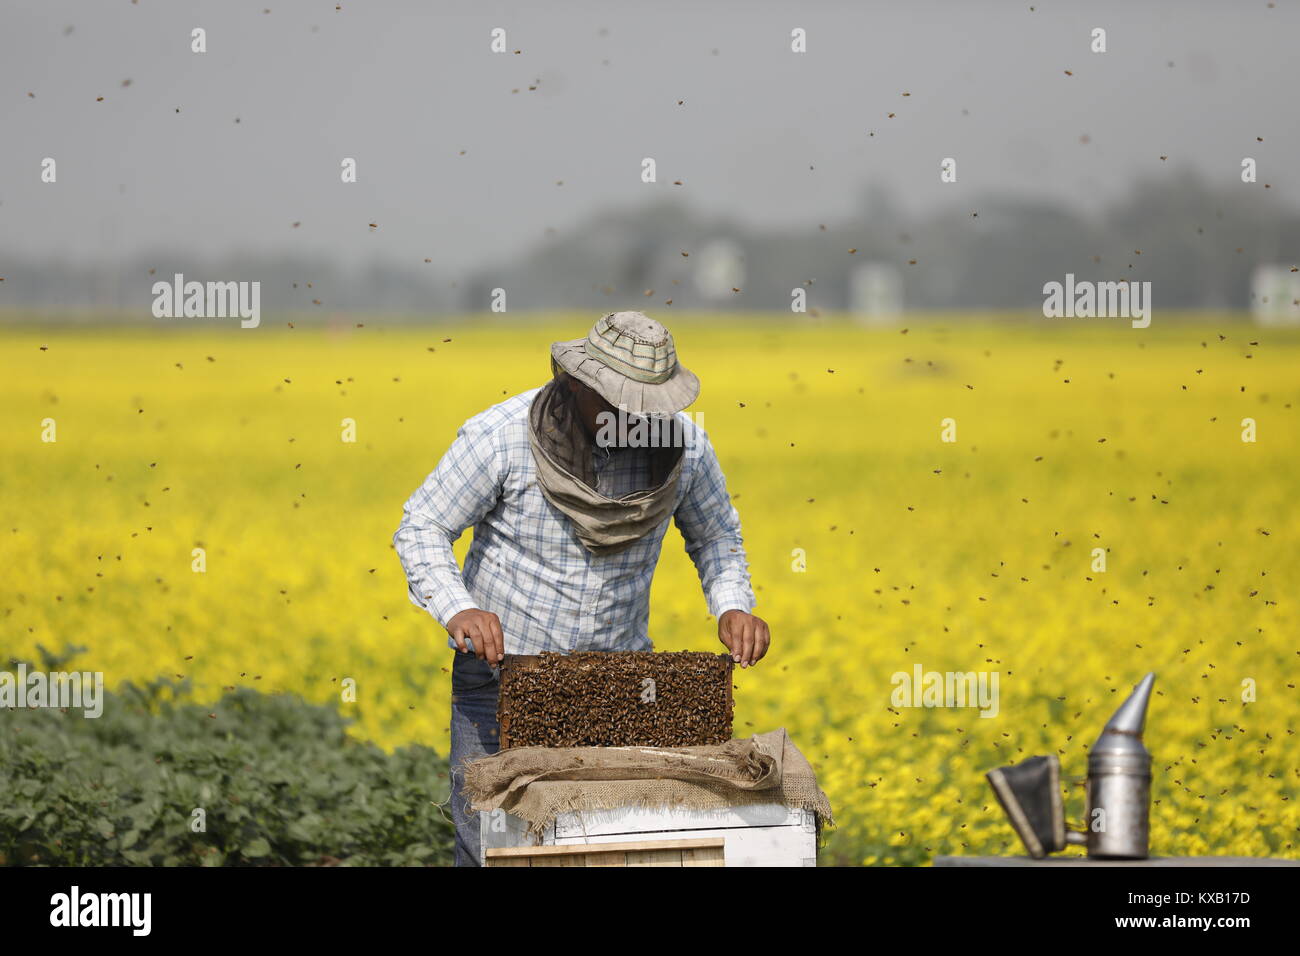 Munshigonj, Bangladesh, on January 09, 2018. Farmers seen at a honey farm collecting honeycomb from specially prepared box around mustard field in Munshigonj, Bangladesh, on January 09, 2018. According to the Bangladesh Institute of Apiculture (BIA), around 25 thousand cultivators including 1,000 commercial agriculturists produce at least 1500 tons of good quality honey a year across the country. Credit: Sajjad Nayan/Alamy Live News Stock Photo